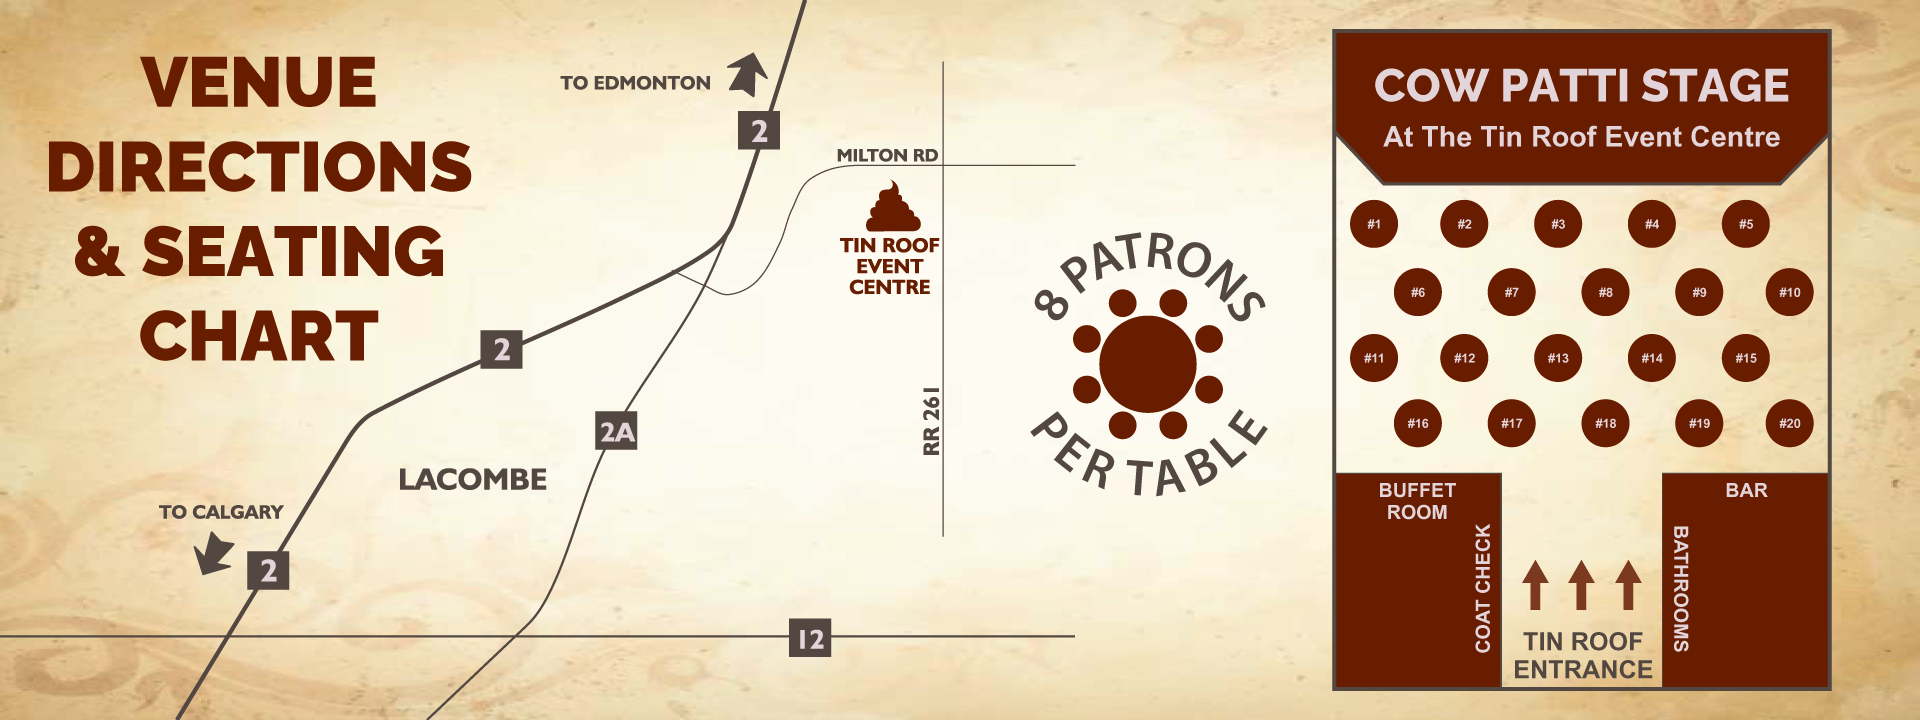 Cow Patti Venue Directions & Seating at Tin Roof Event Centre